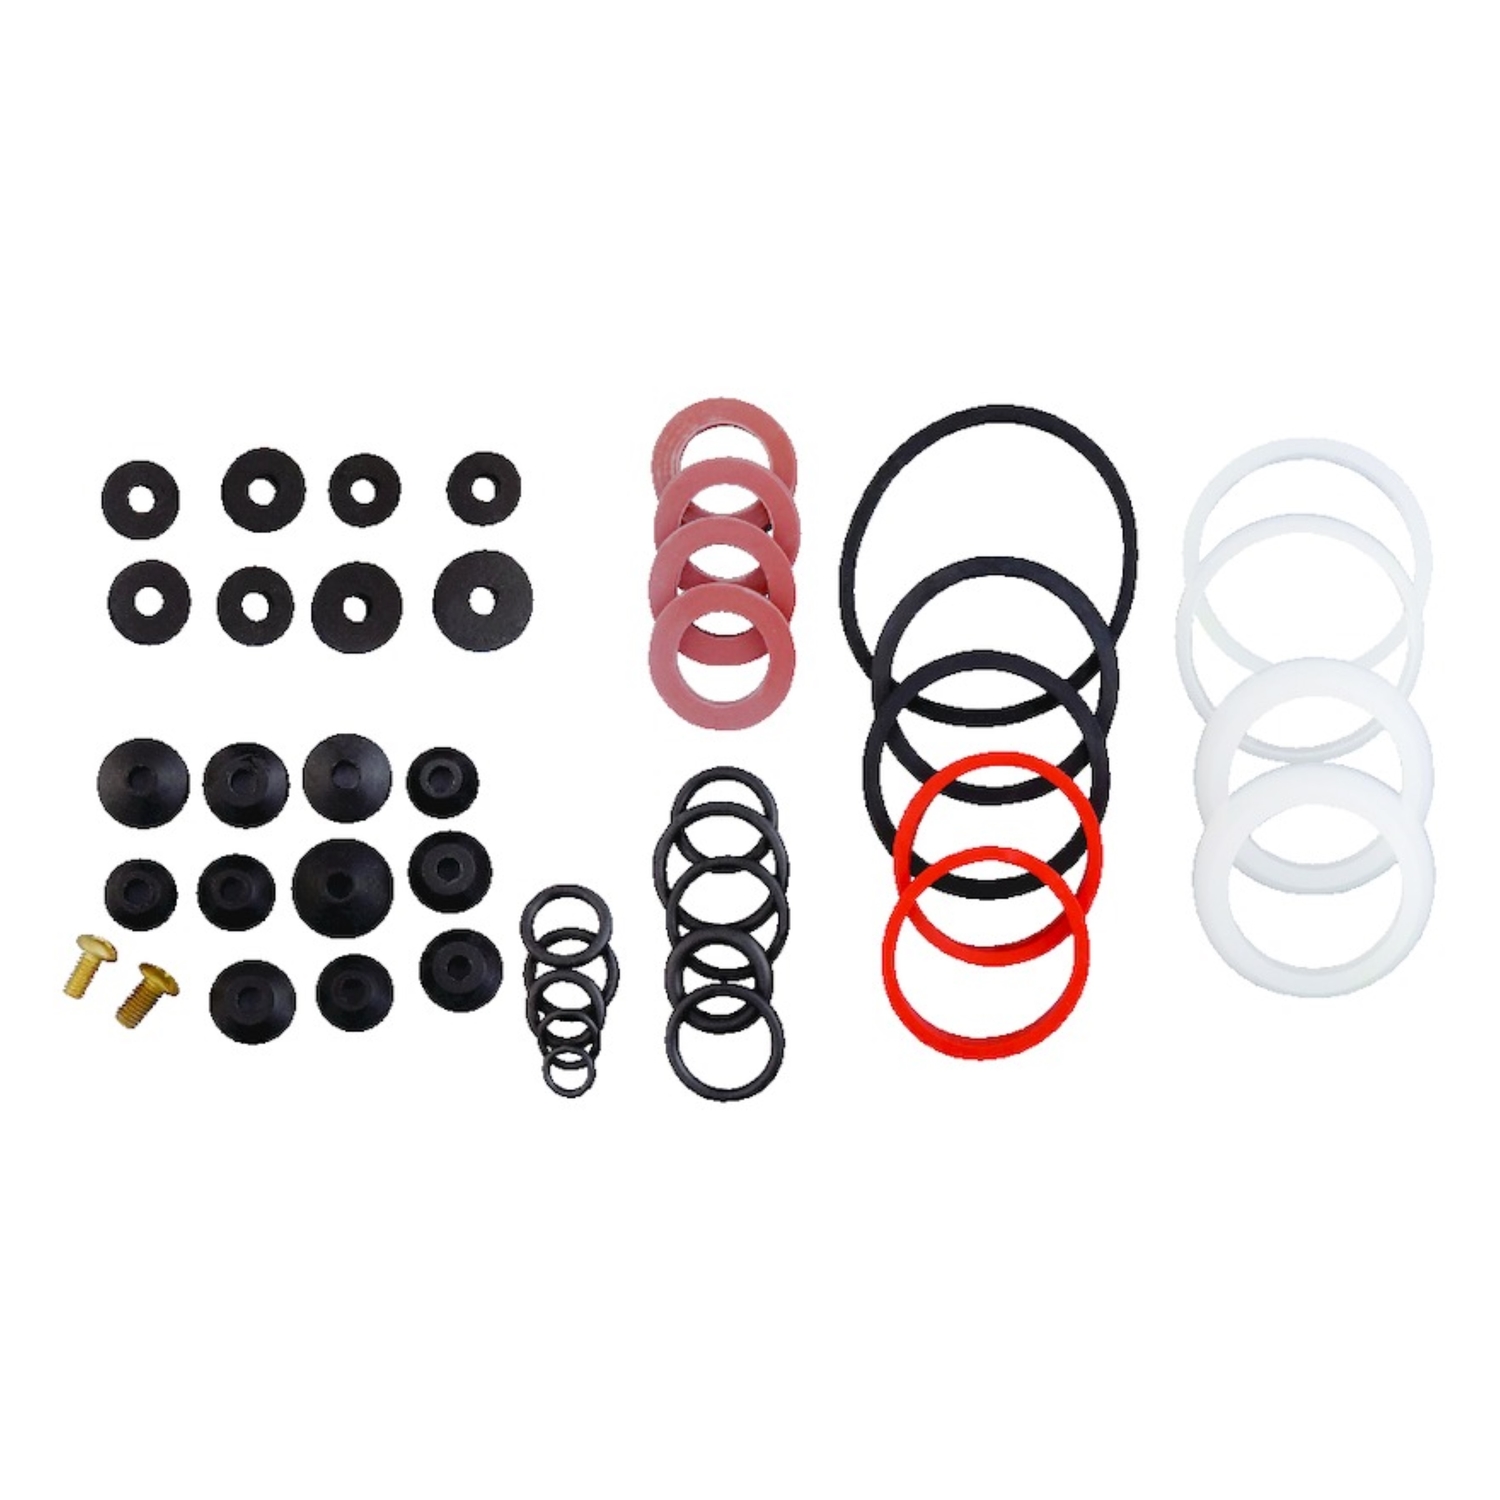 Ace Assorted in. D Rubber Washer Emergency Kit 1 pk